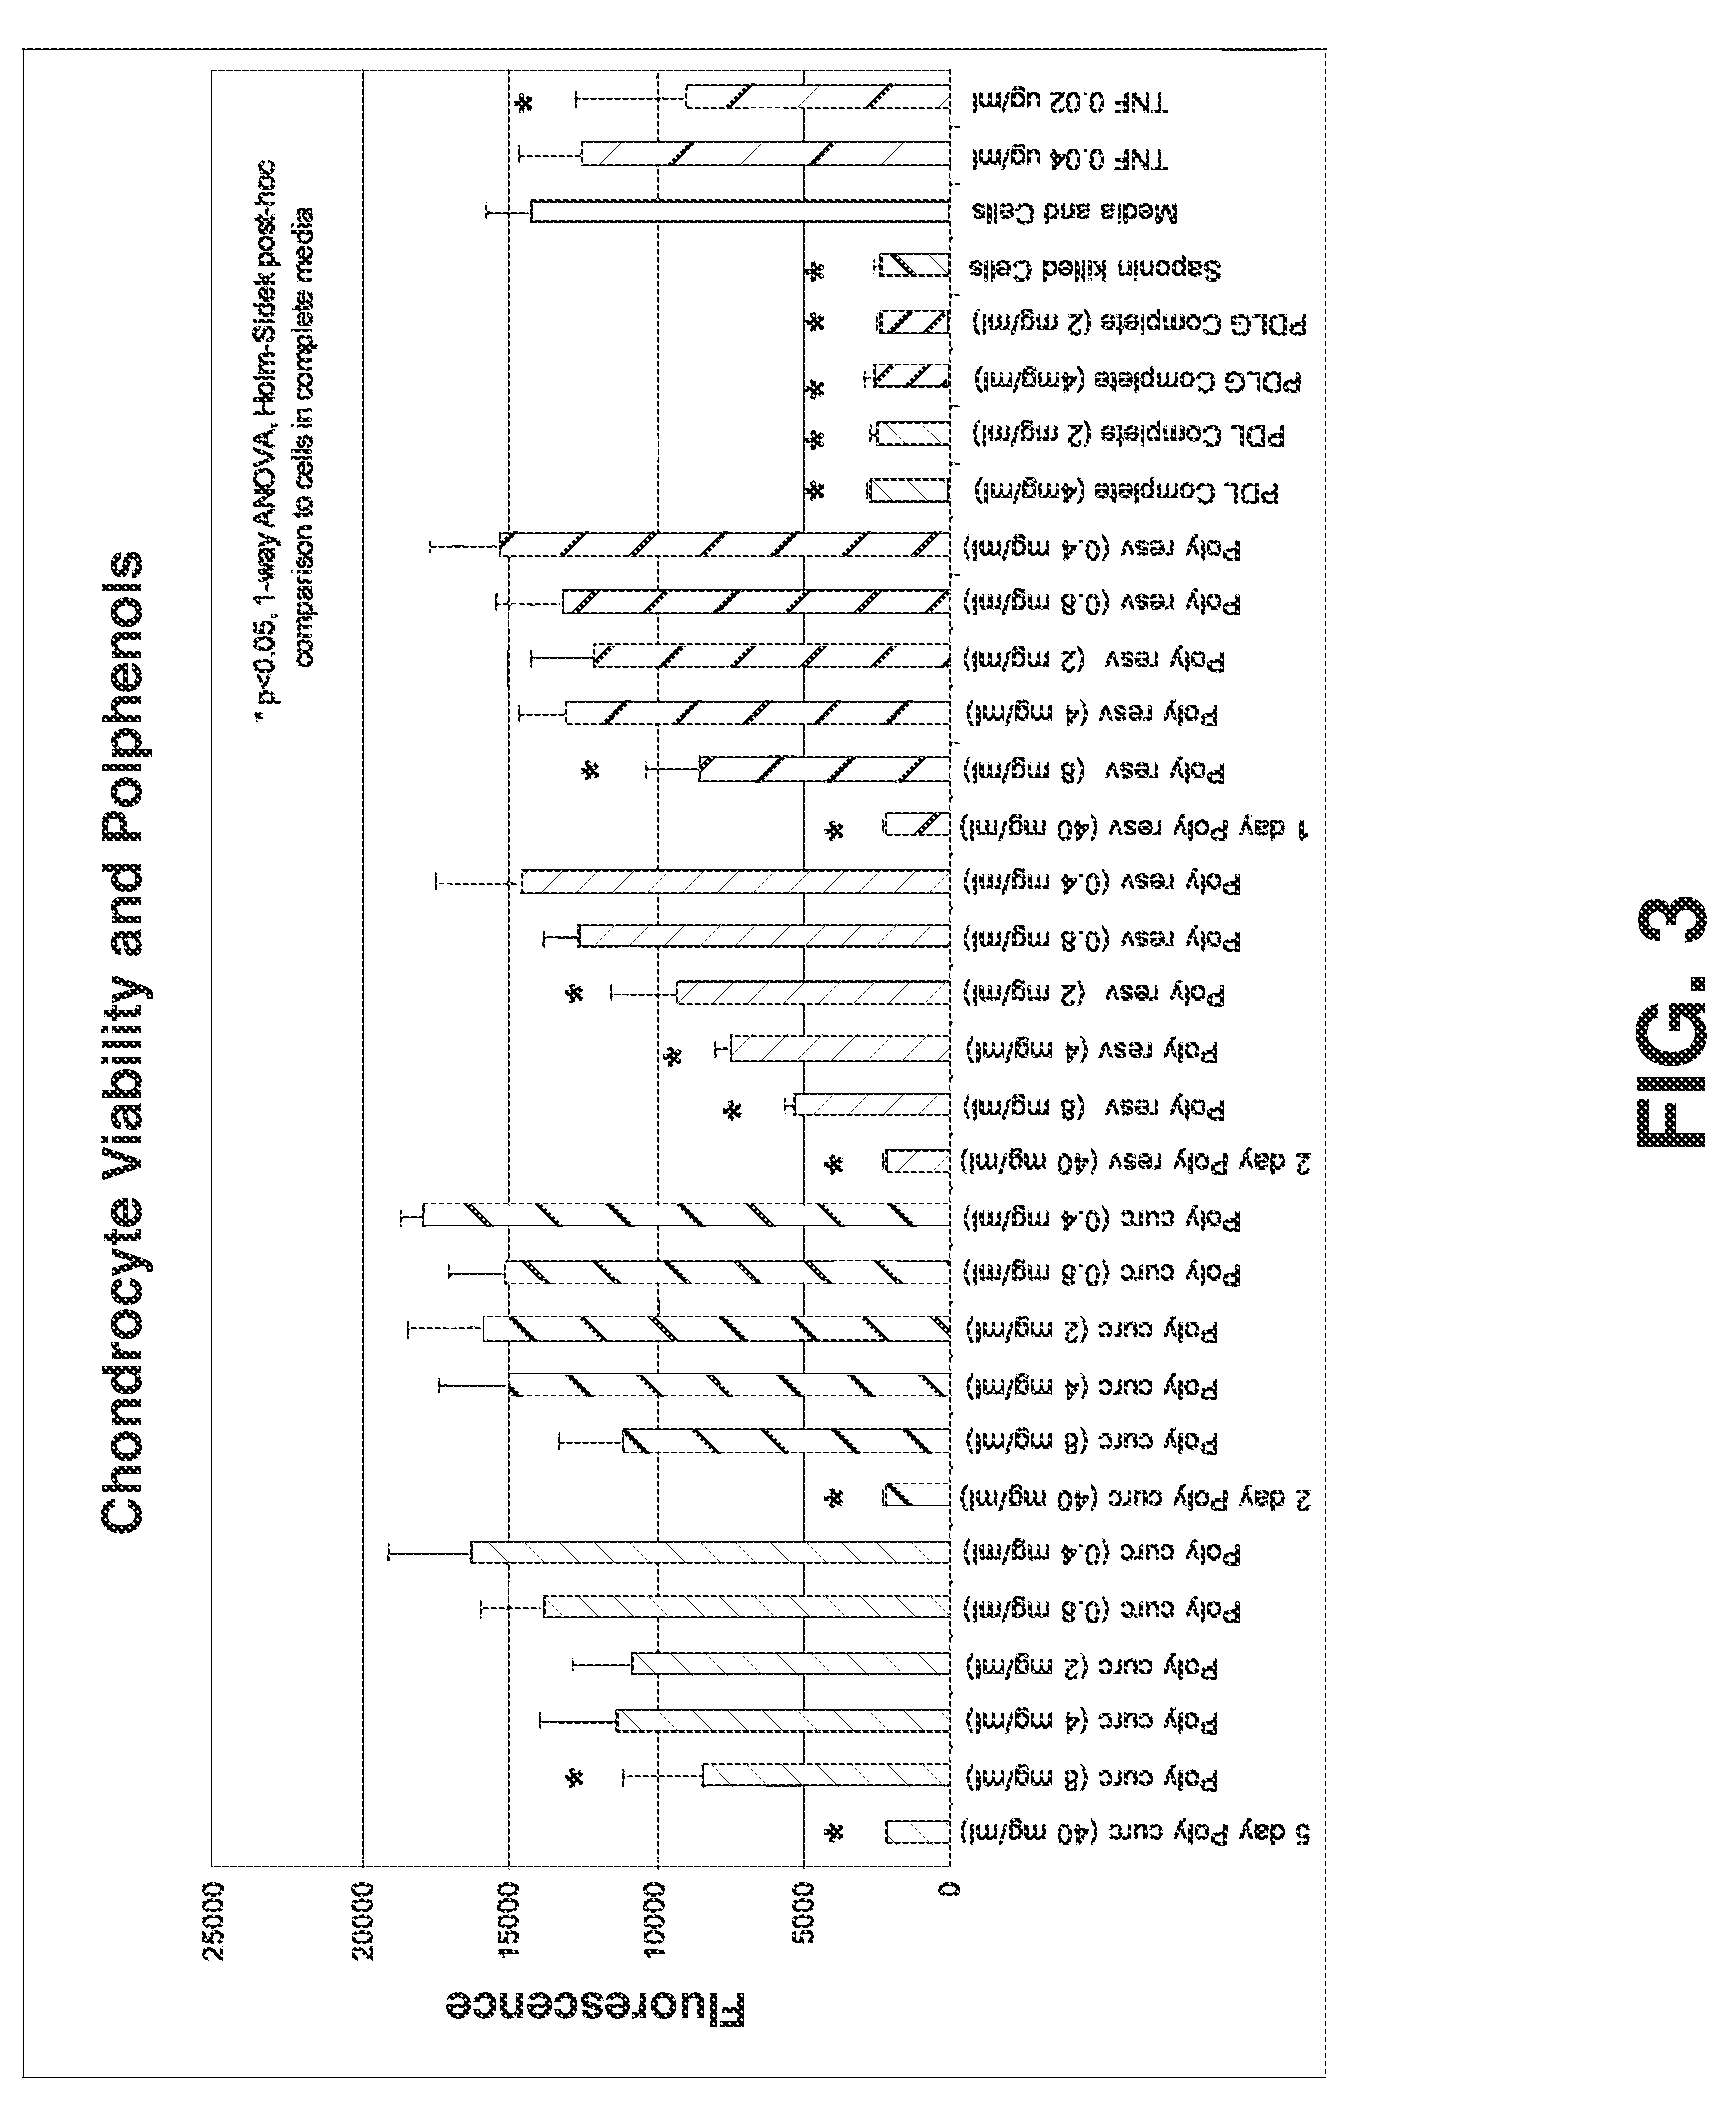 Therapeutic polymers and methods of generation